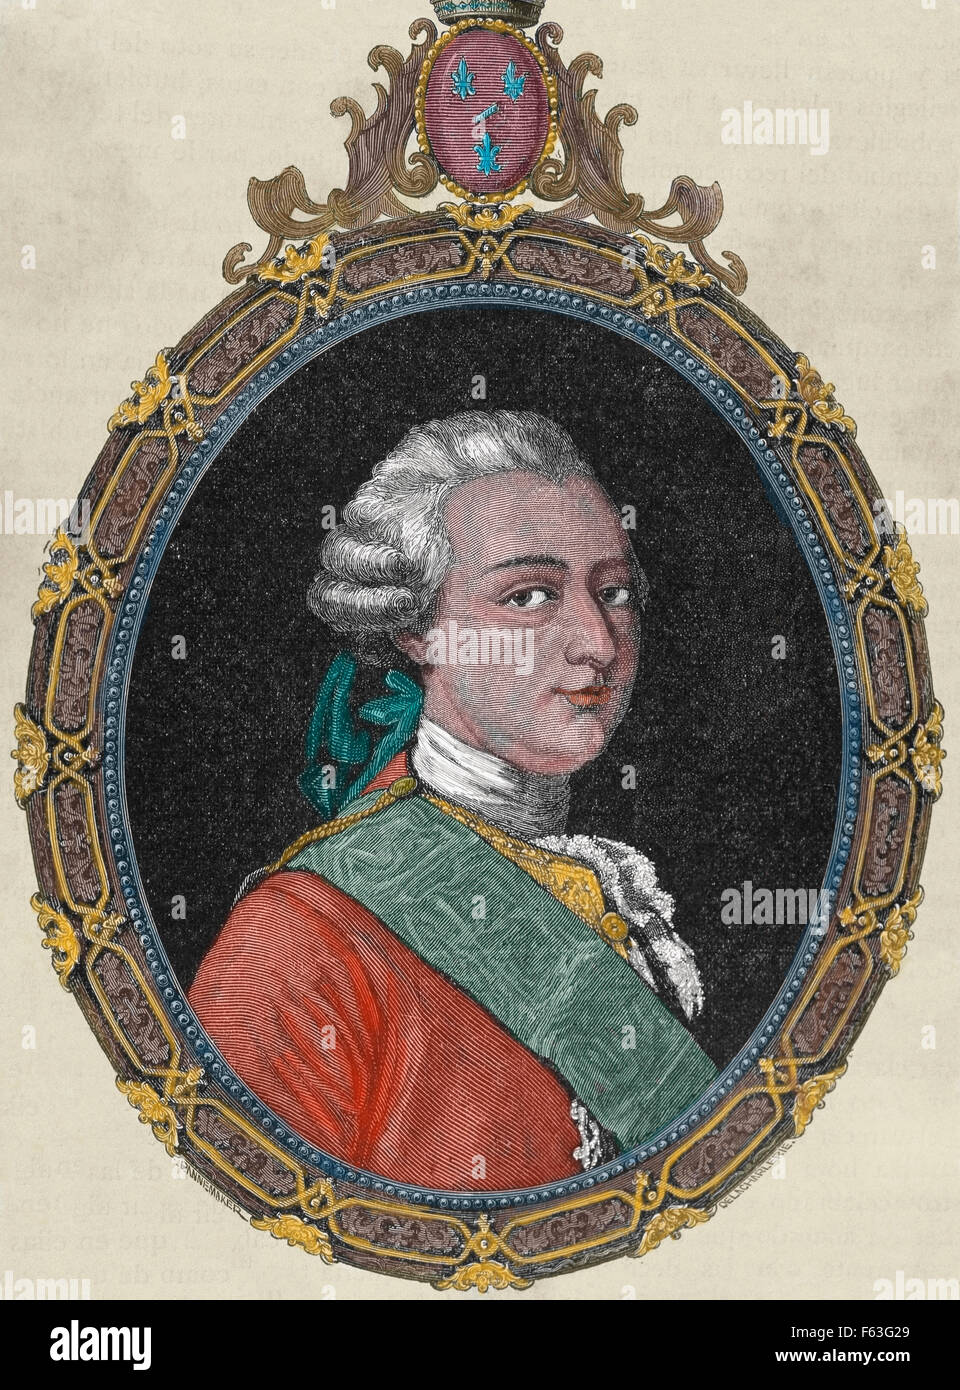 Louis Joseph of Conde (1736-1818). Prince of Conde from 1740-1818. House of Bourbon. Portrait. Engraving, 19th century. Colored. Stock Photo